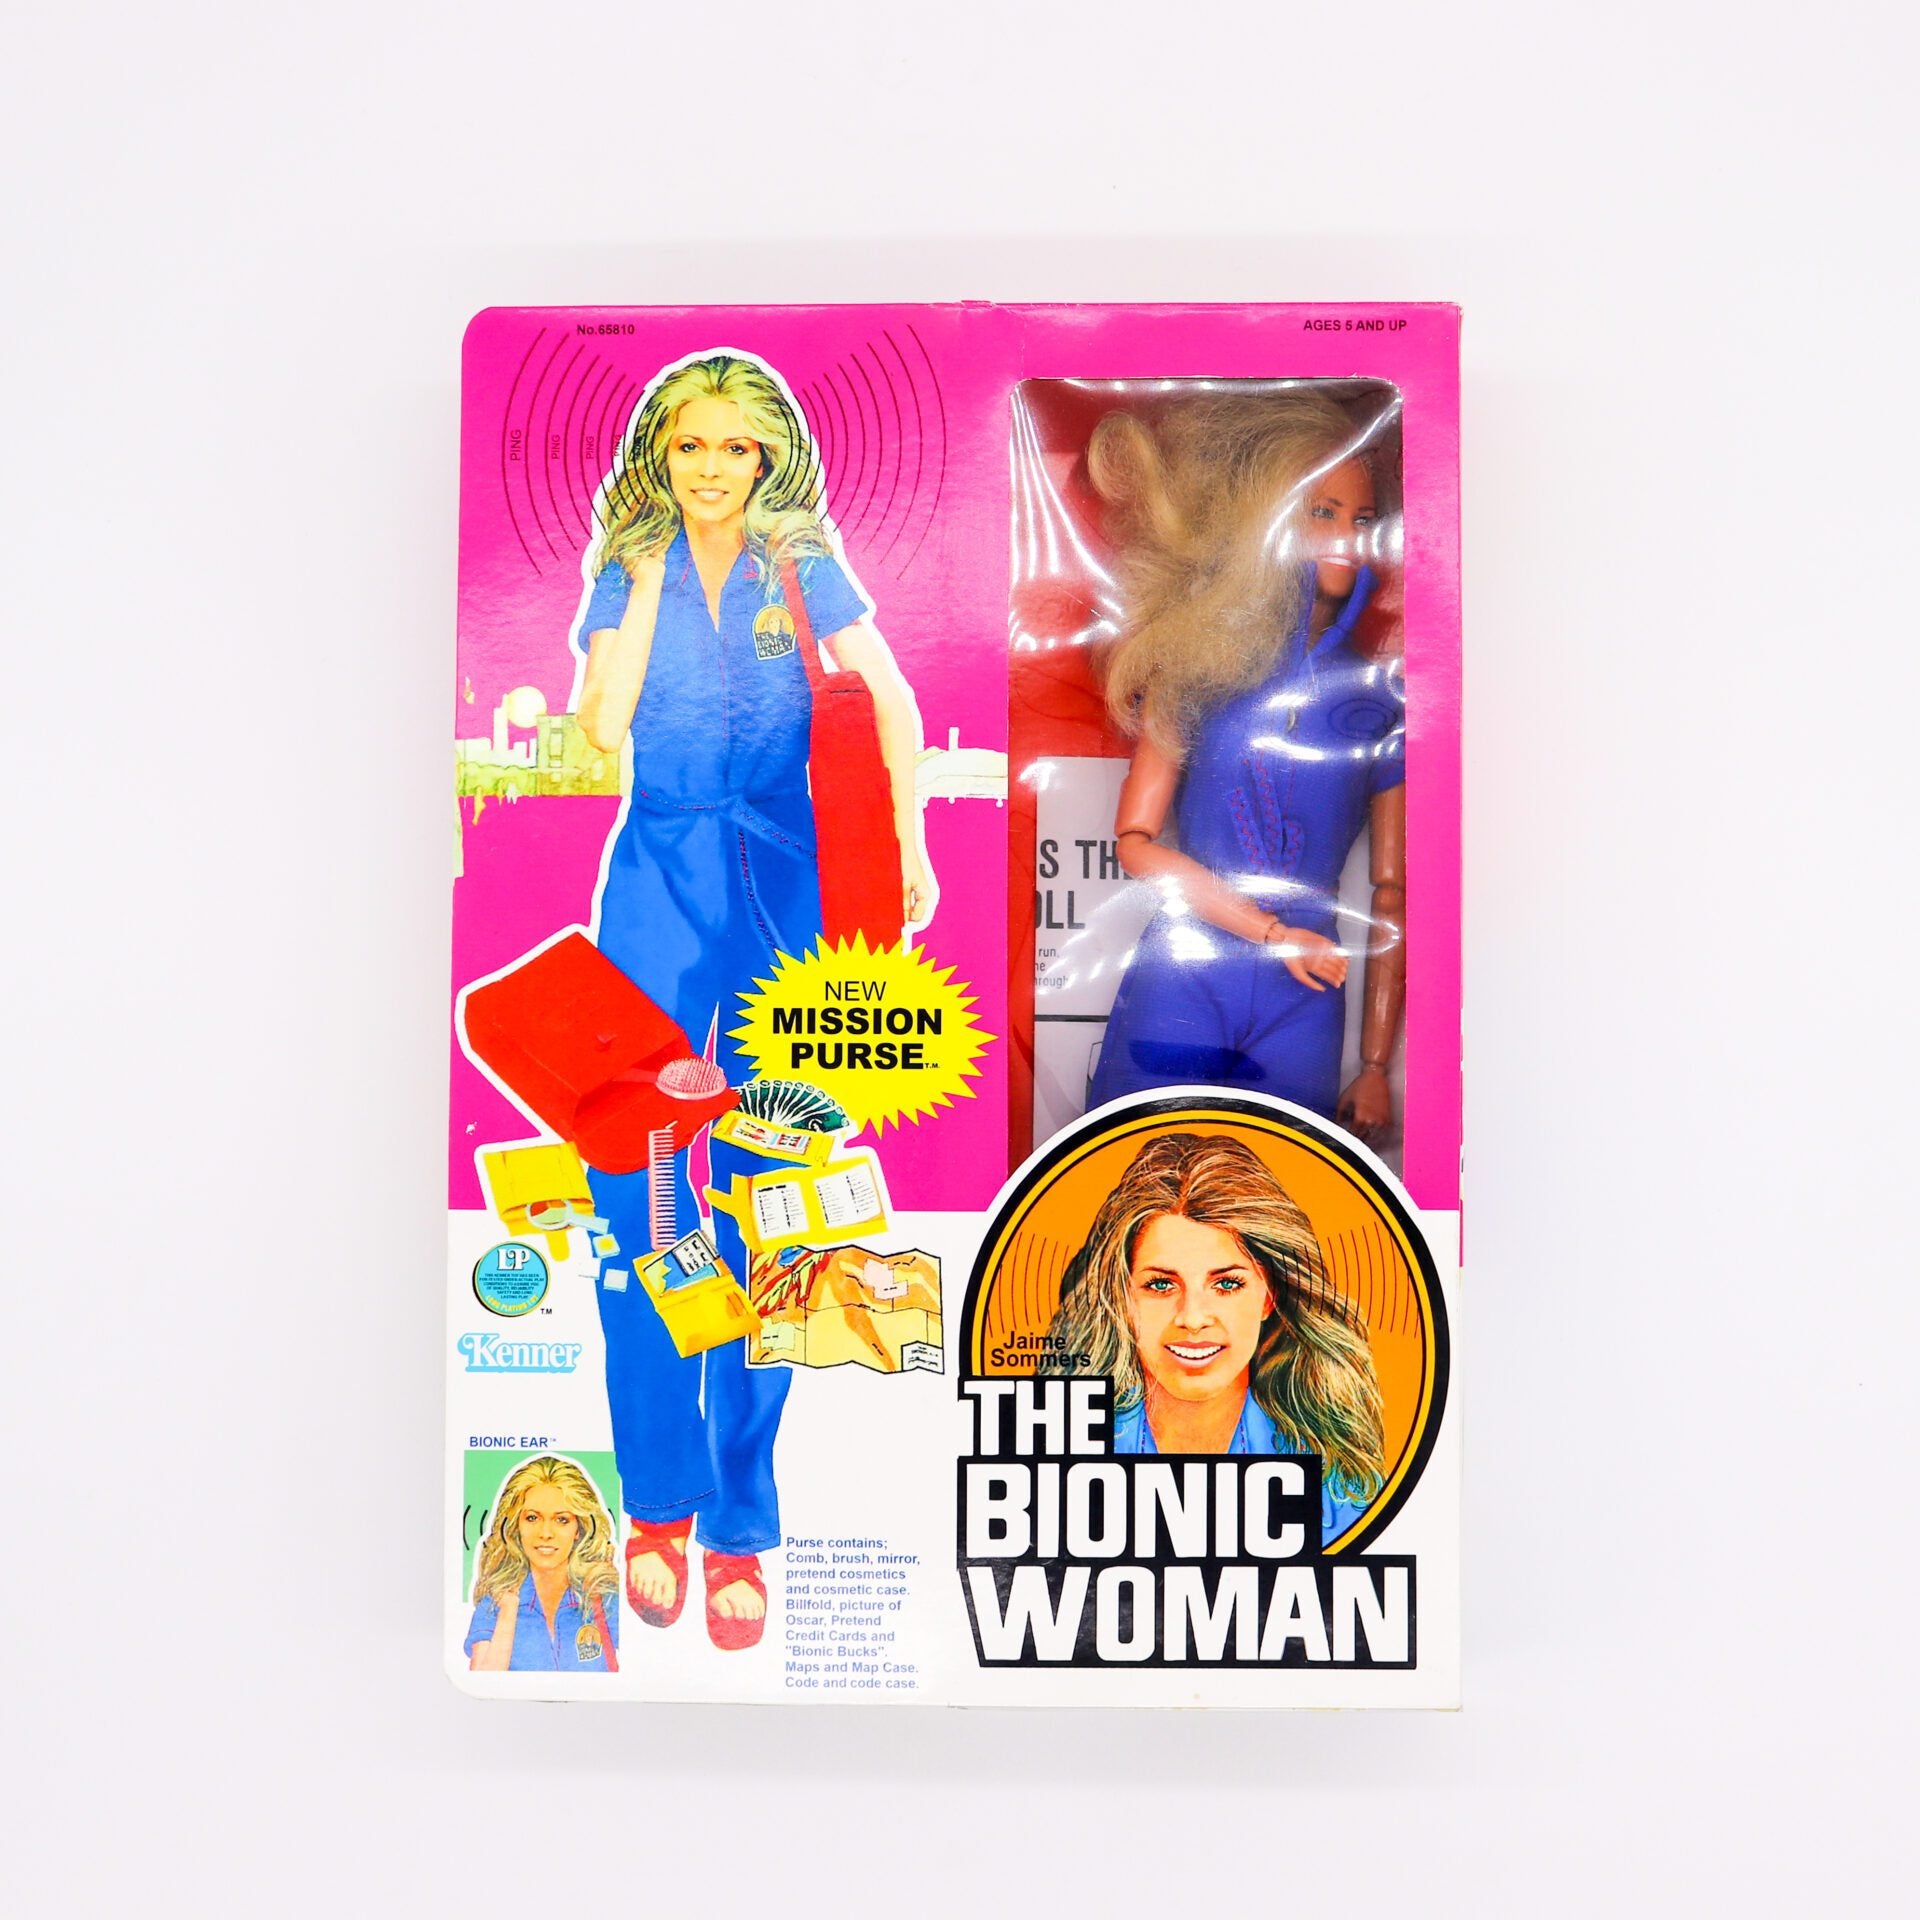 Vintage Bionic Woman Doll, First Version, Kenner, Action Figure, Jaime  Sommers, 1974